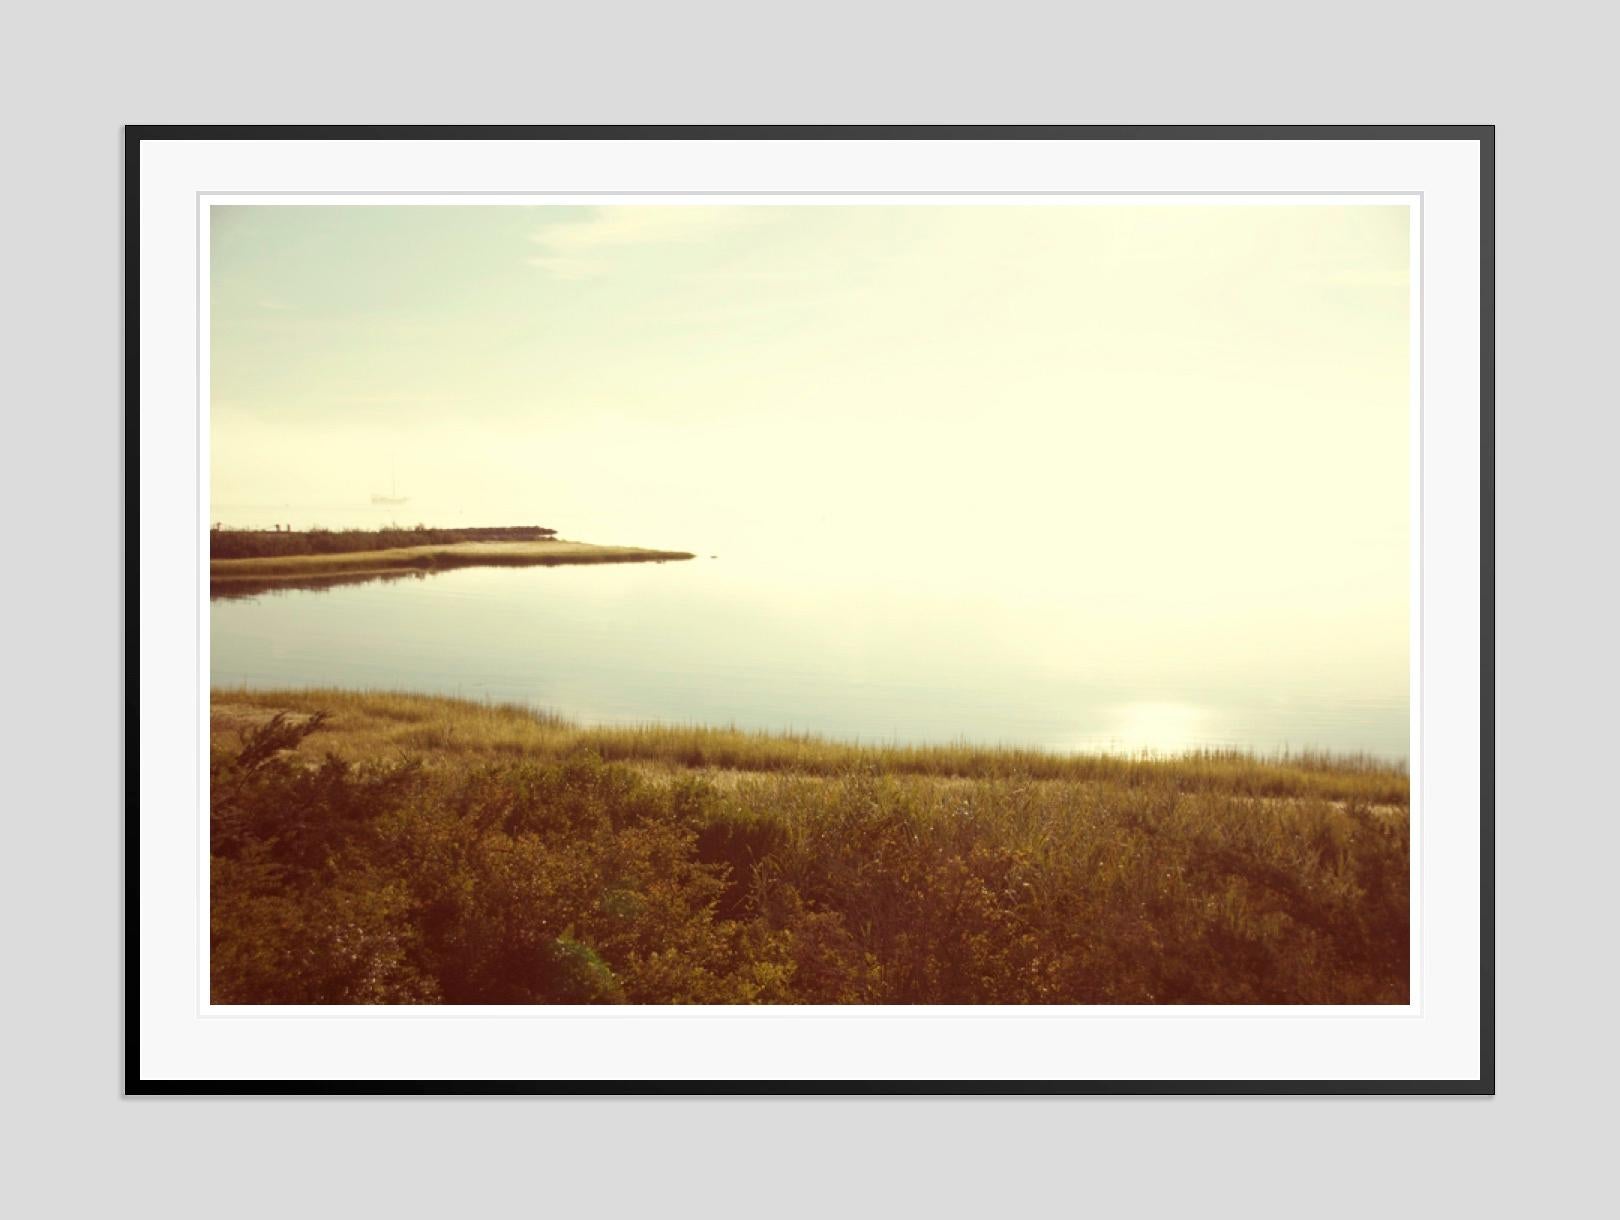 Marion Misty Morning -  Oversize Signed Limited Edition Print  - Photograph by Stuart Möller